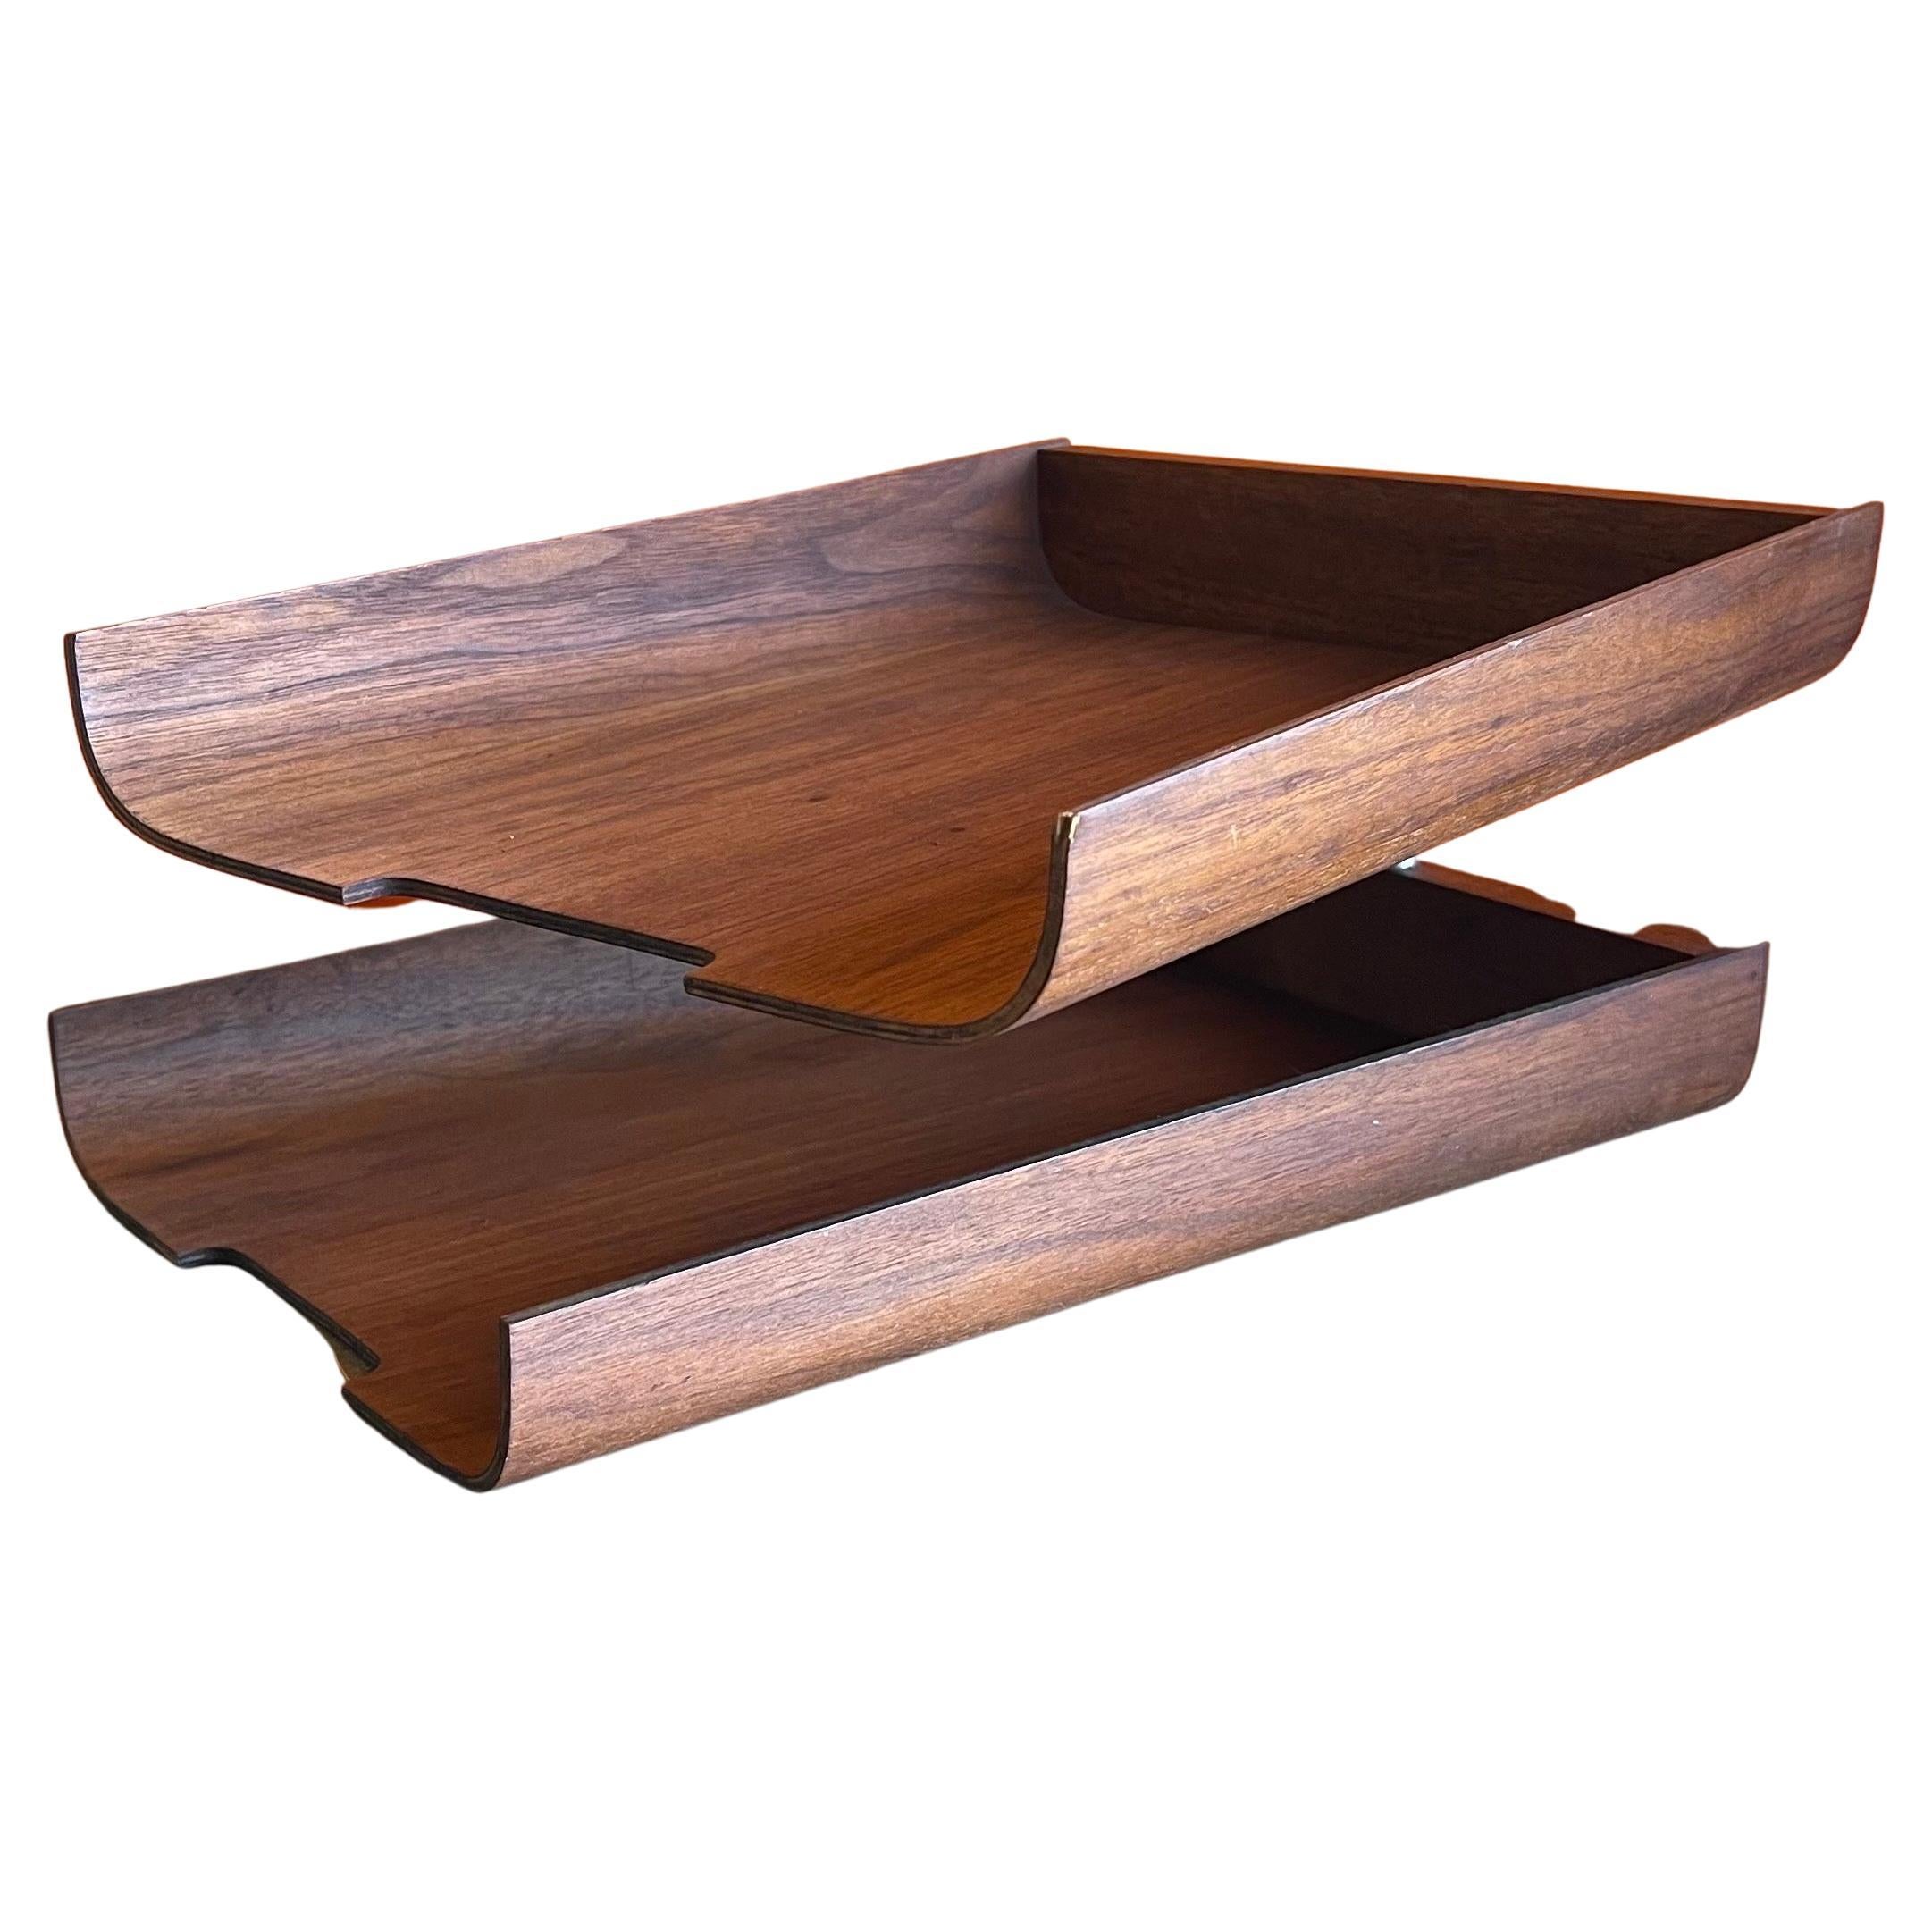 Very nice and functional double letter tray in the style of Martin Aberg for Rainbow Wood Products Company of Sweden, circa 1970s. The trays are made of molded teak plywood and can swivel into any number of configurations to meet your office needs.